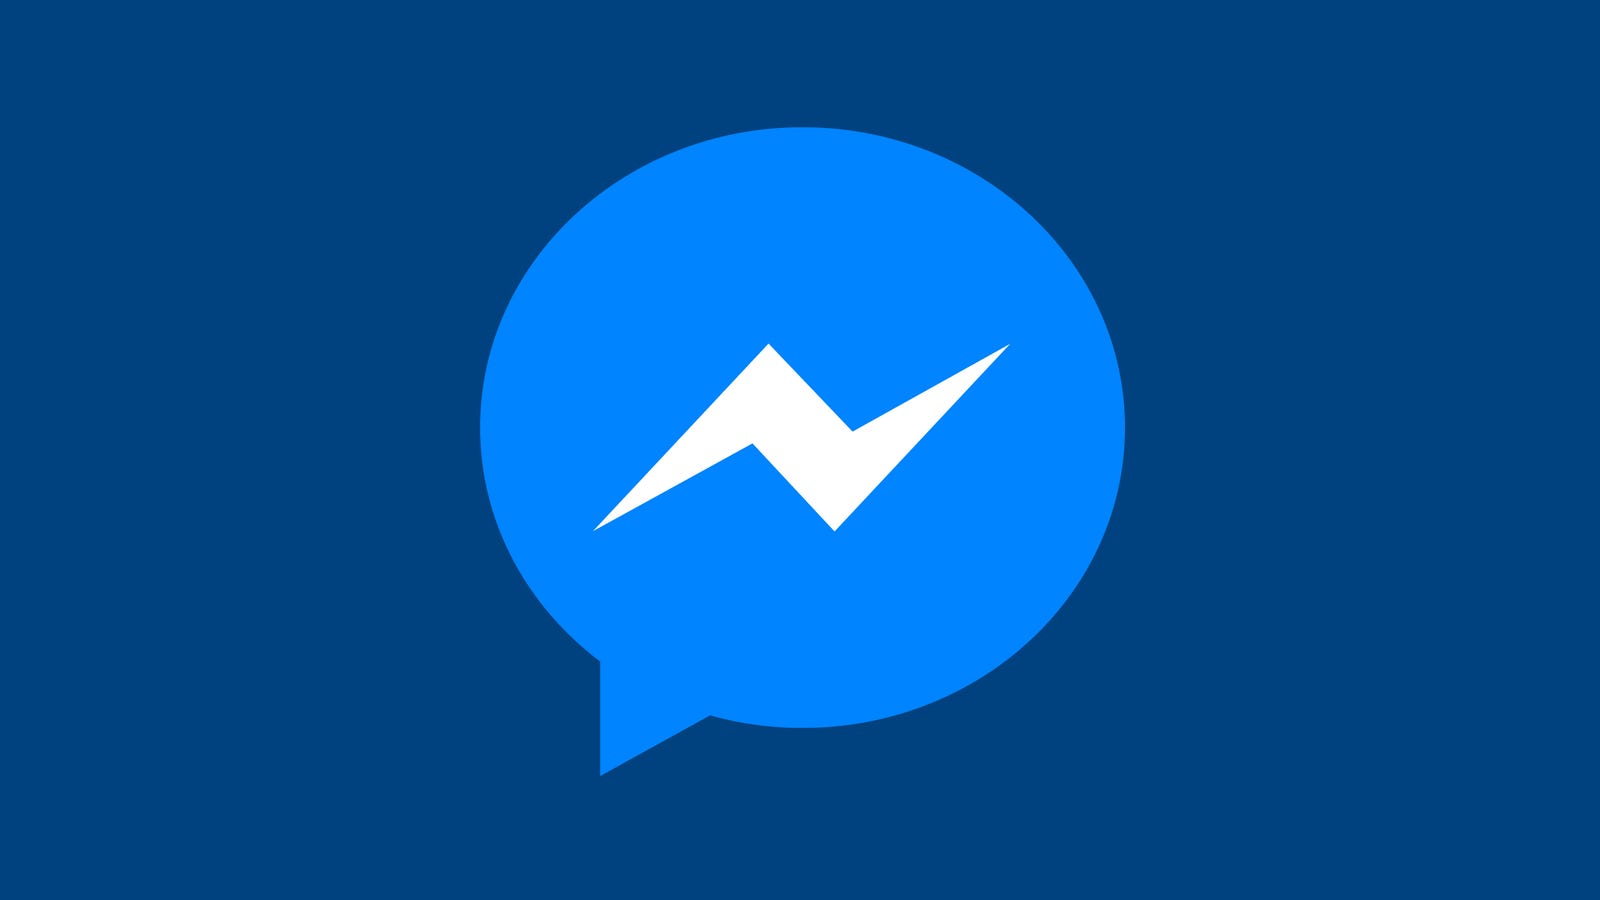 10 Facebook Messenger Secrets You Need to Know